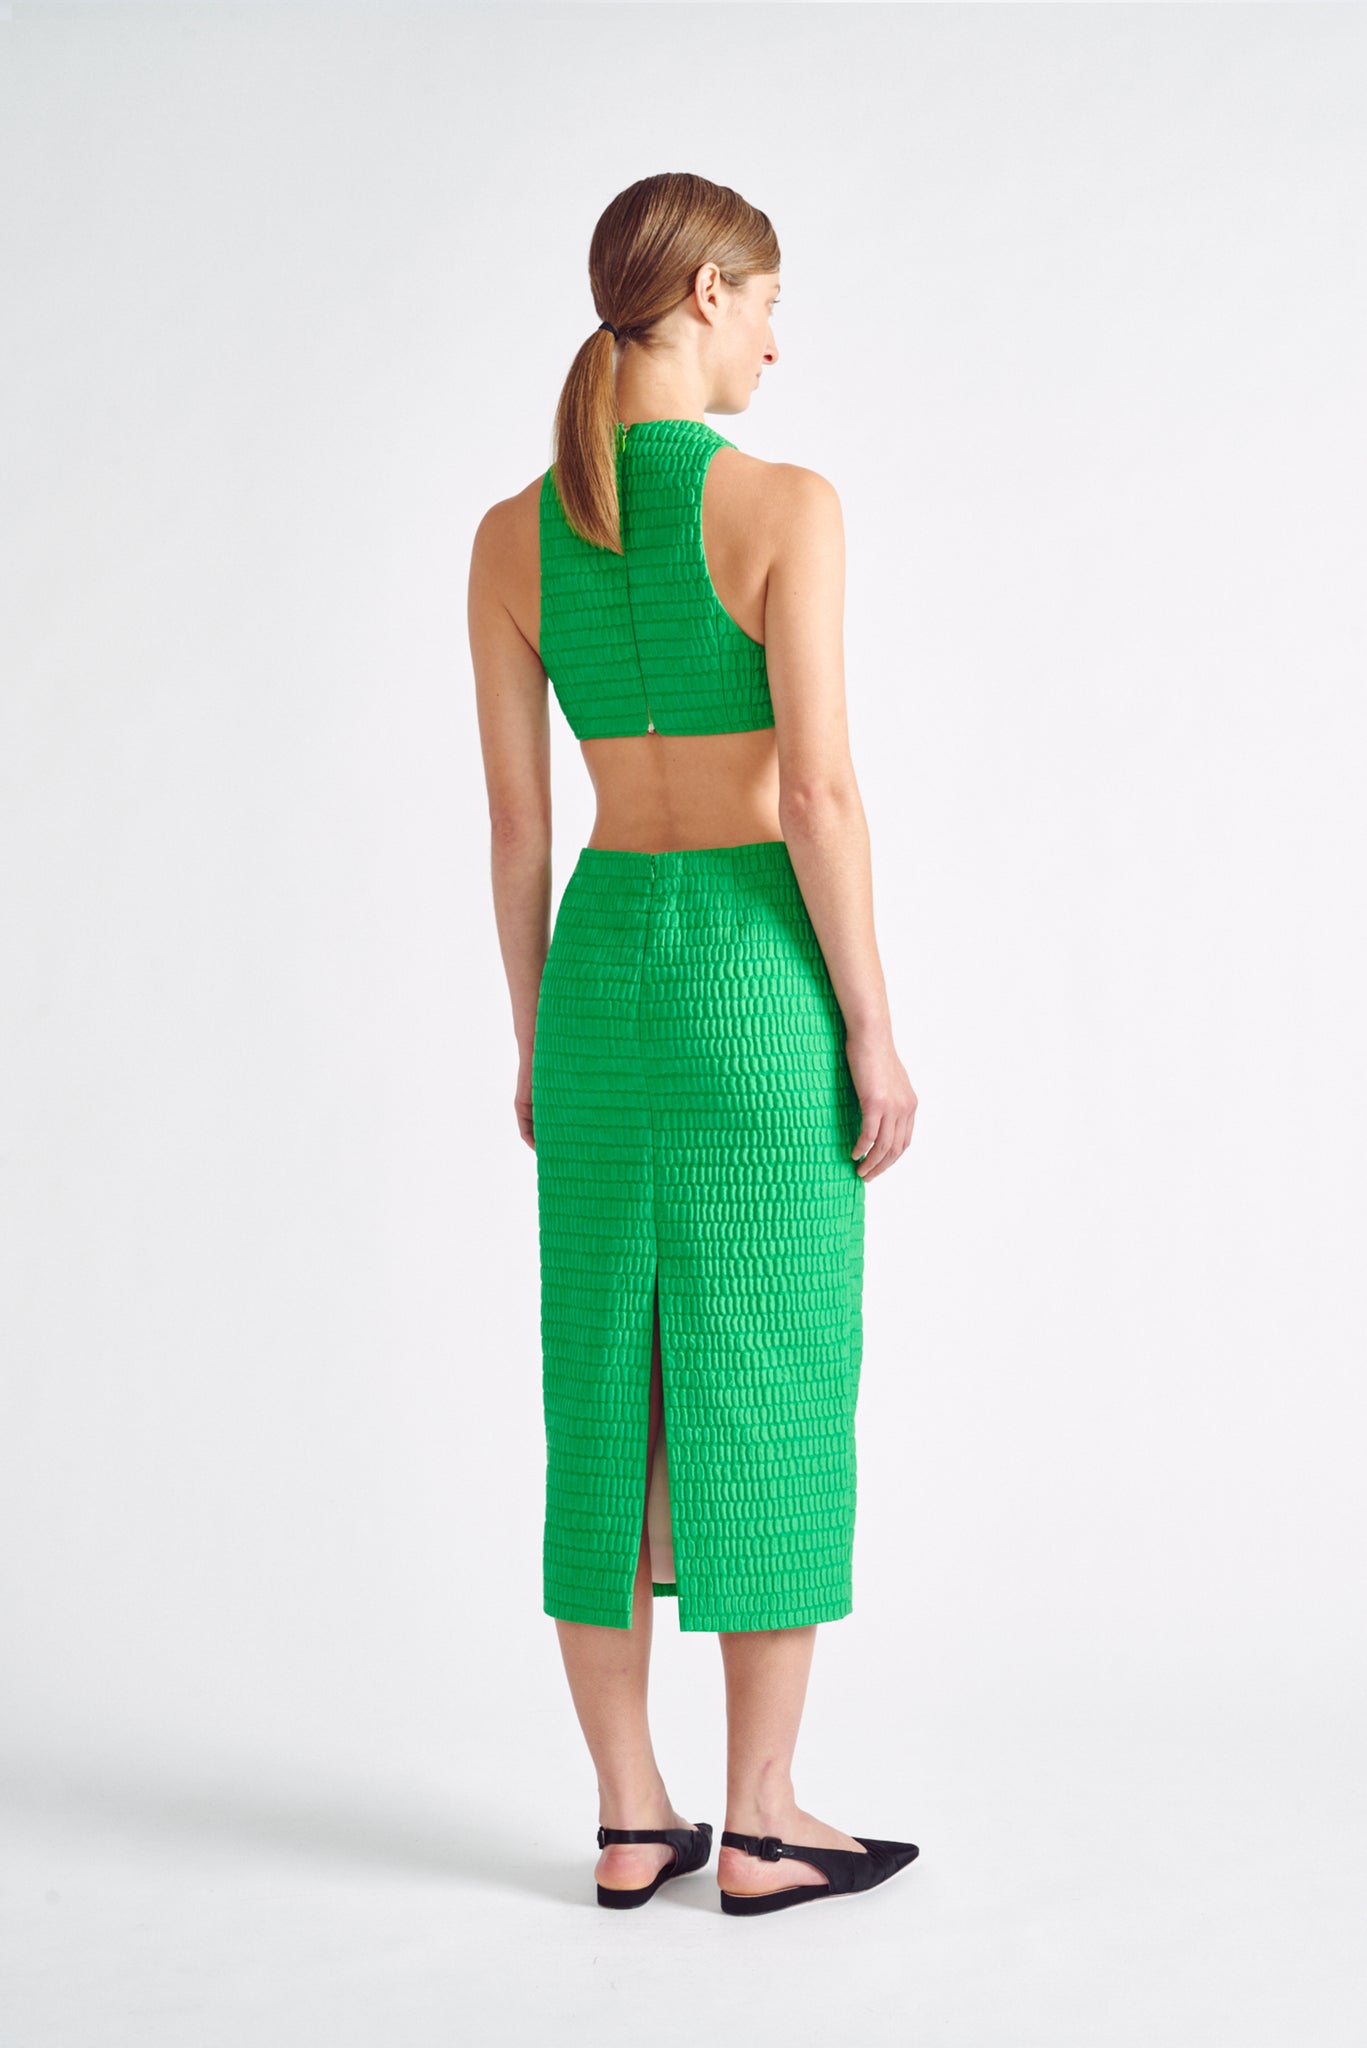 Kyesha Top | Green Cropped Top in Croc Jacquard | Emilia Wickstead